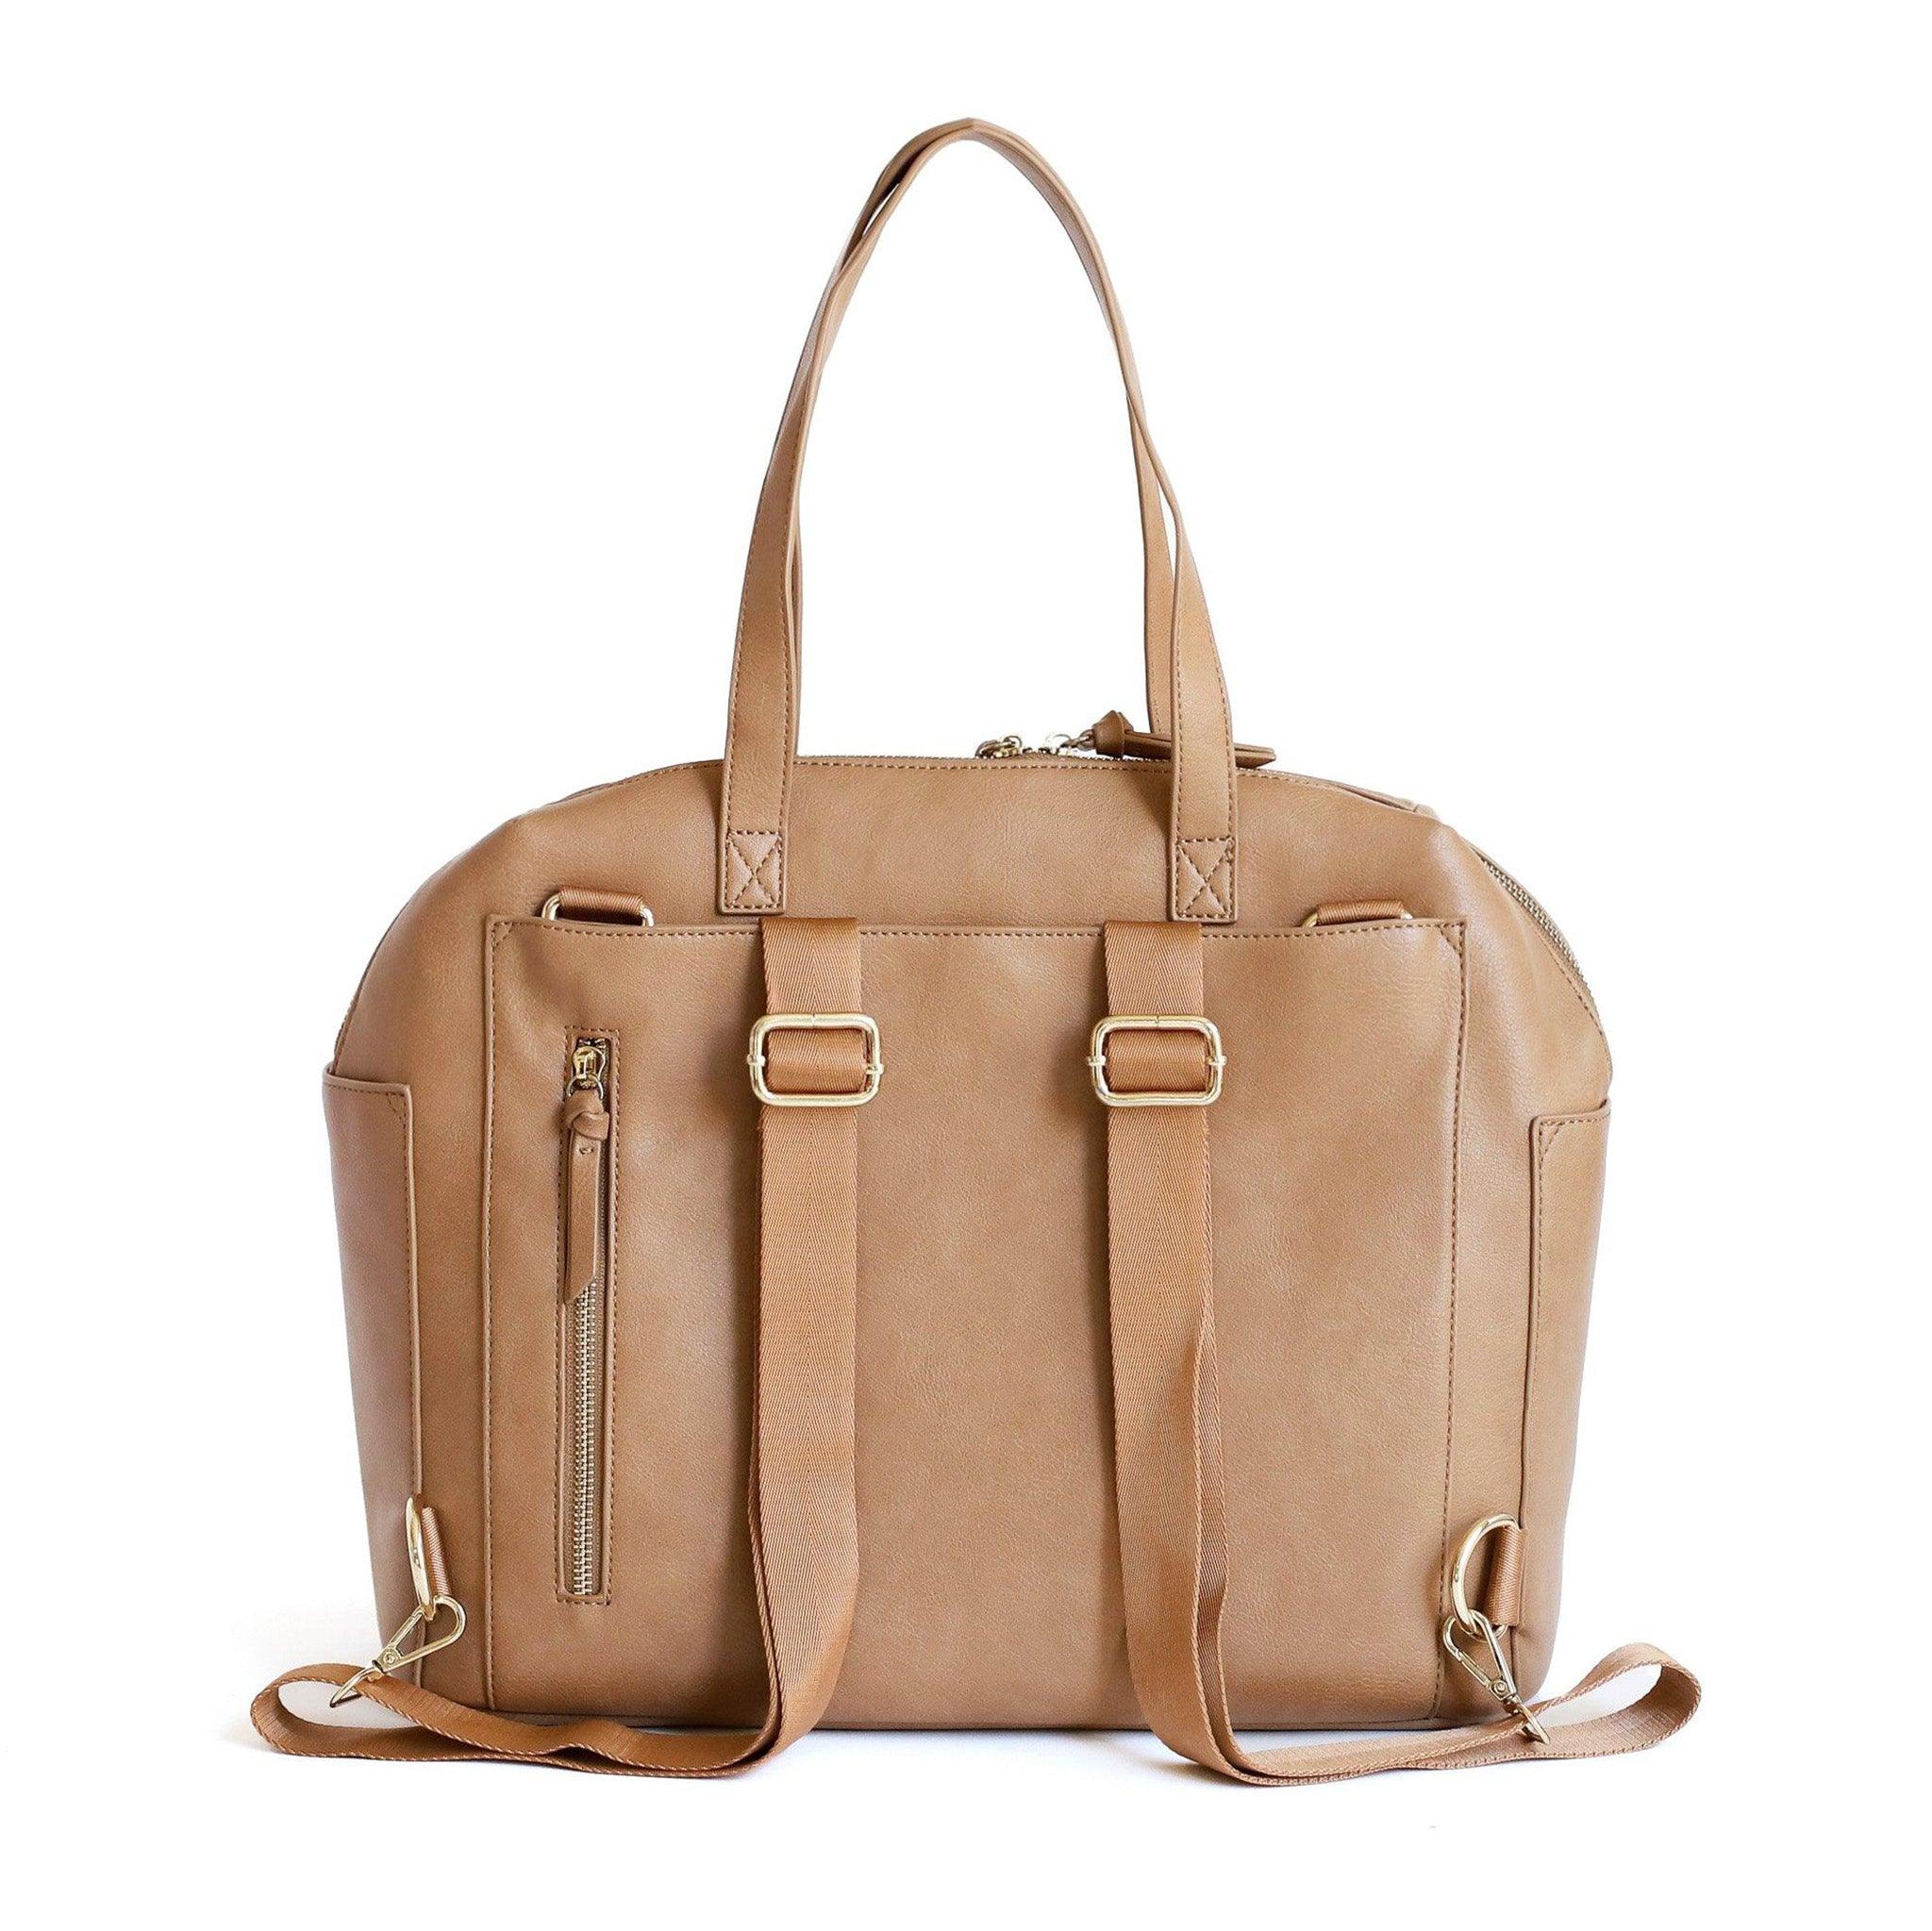 Camel Carryall Convertible Tote